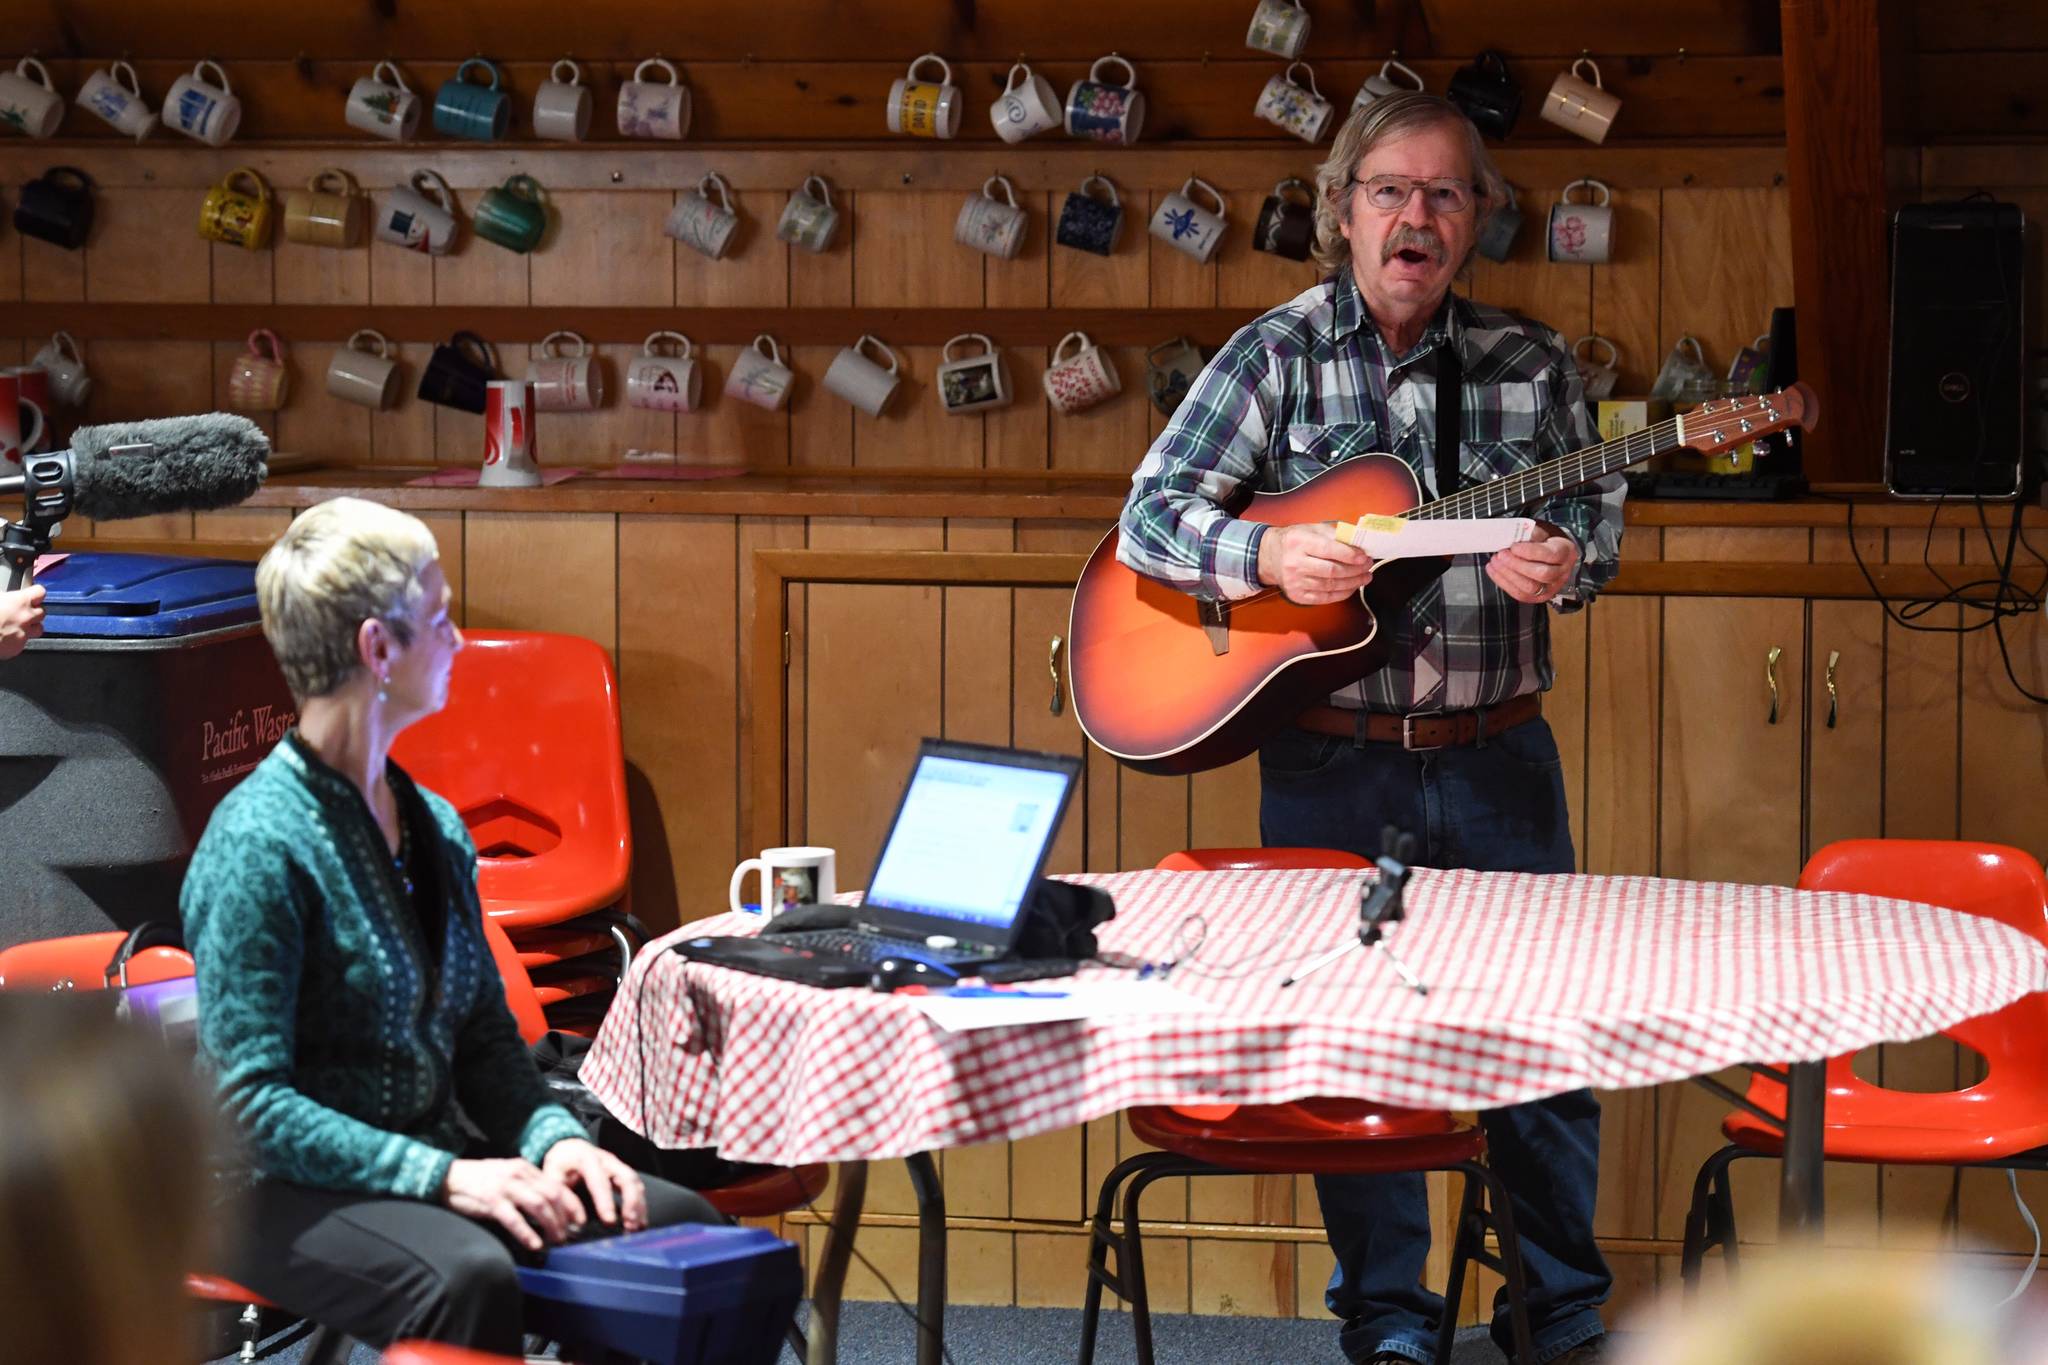 SEACC’s former Executive Director Bart Koehler sings his testimony to oppose the U.S. Forest Service’s lifting of the Roadless Rule as stenographer Lynda Barker records are Northern Light United Church on Dec. 16, 2019. (Michael Penn | Juneau Empire)